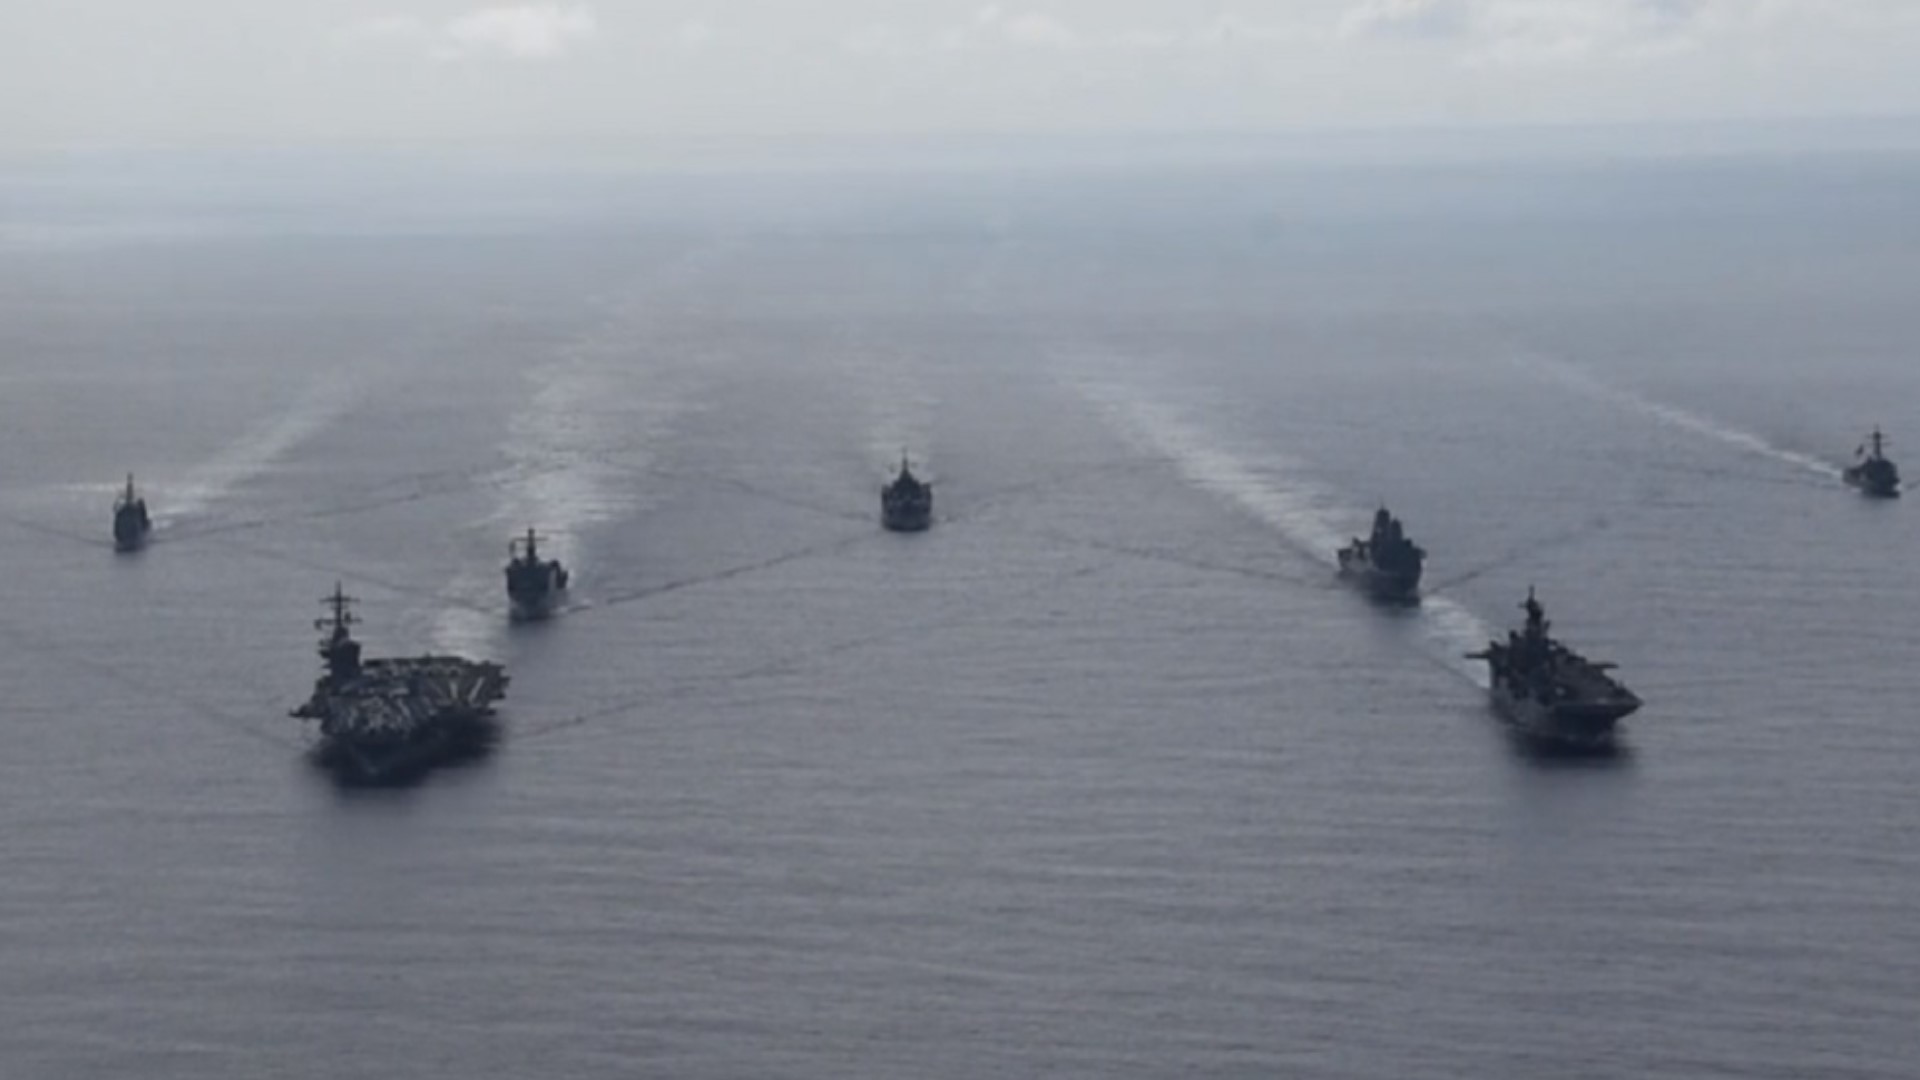 Ships from the Theodore Roosevelt Carrier Strike Group, the America Expeditionary Strike Group, and the U.S. 7th Fleet command ship, USS Blue Ridge in formation.